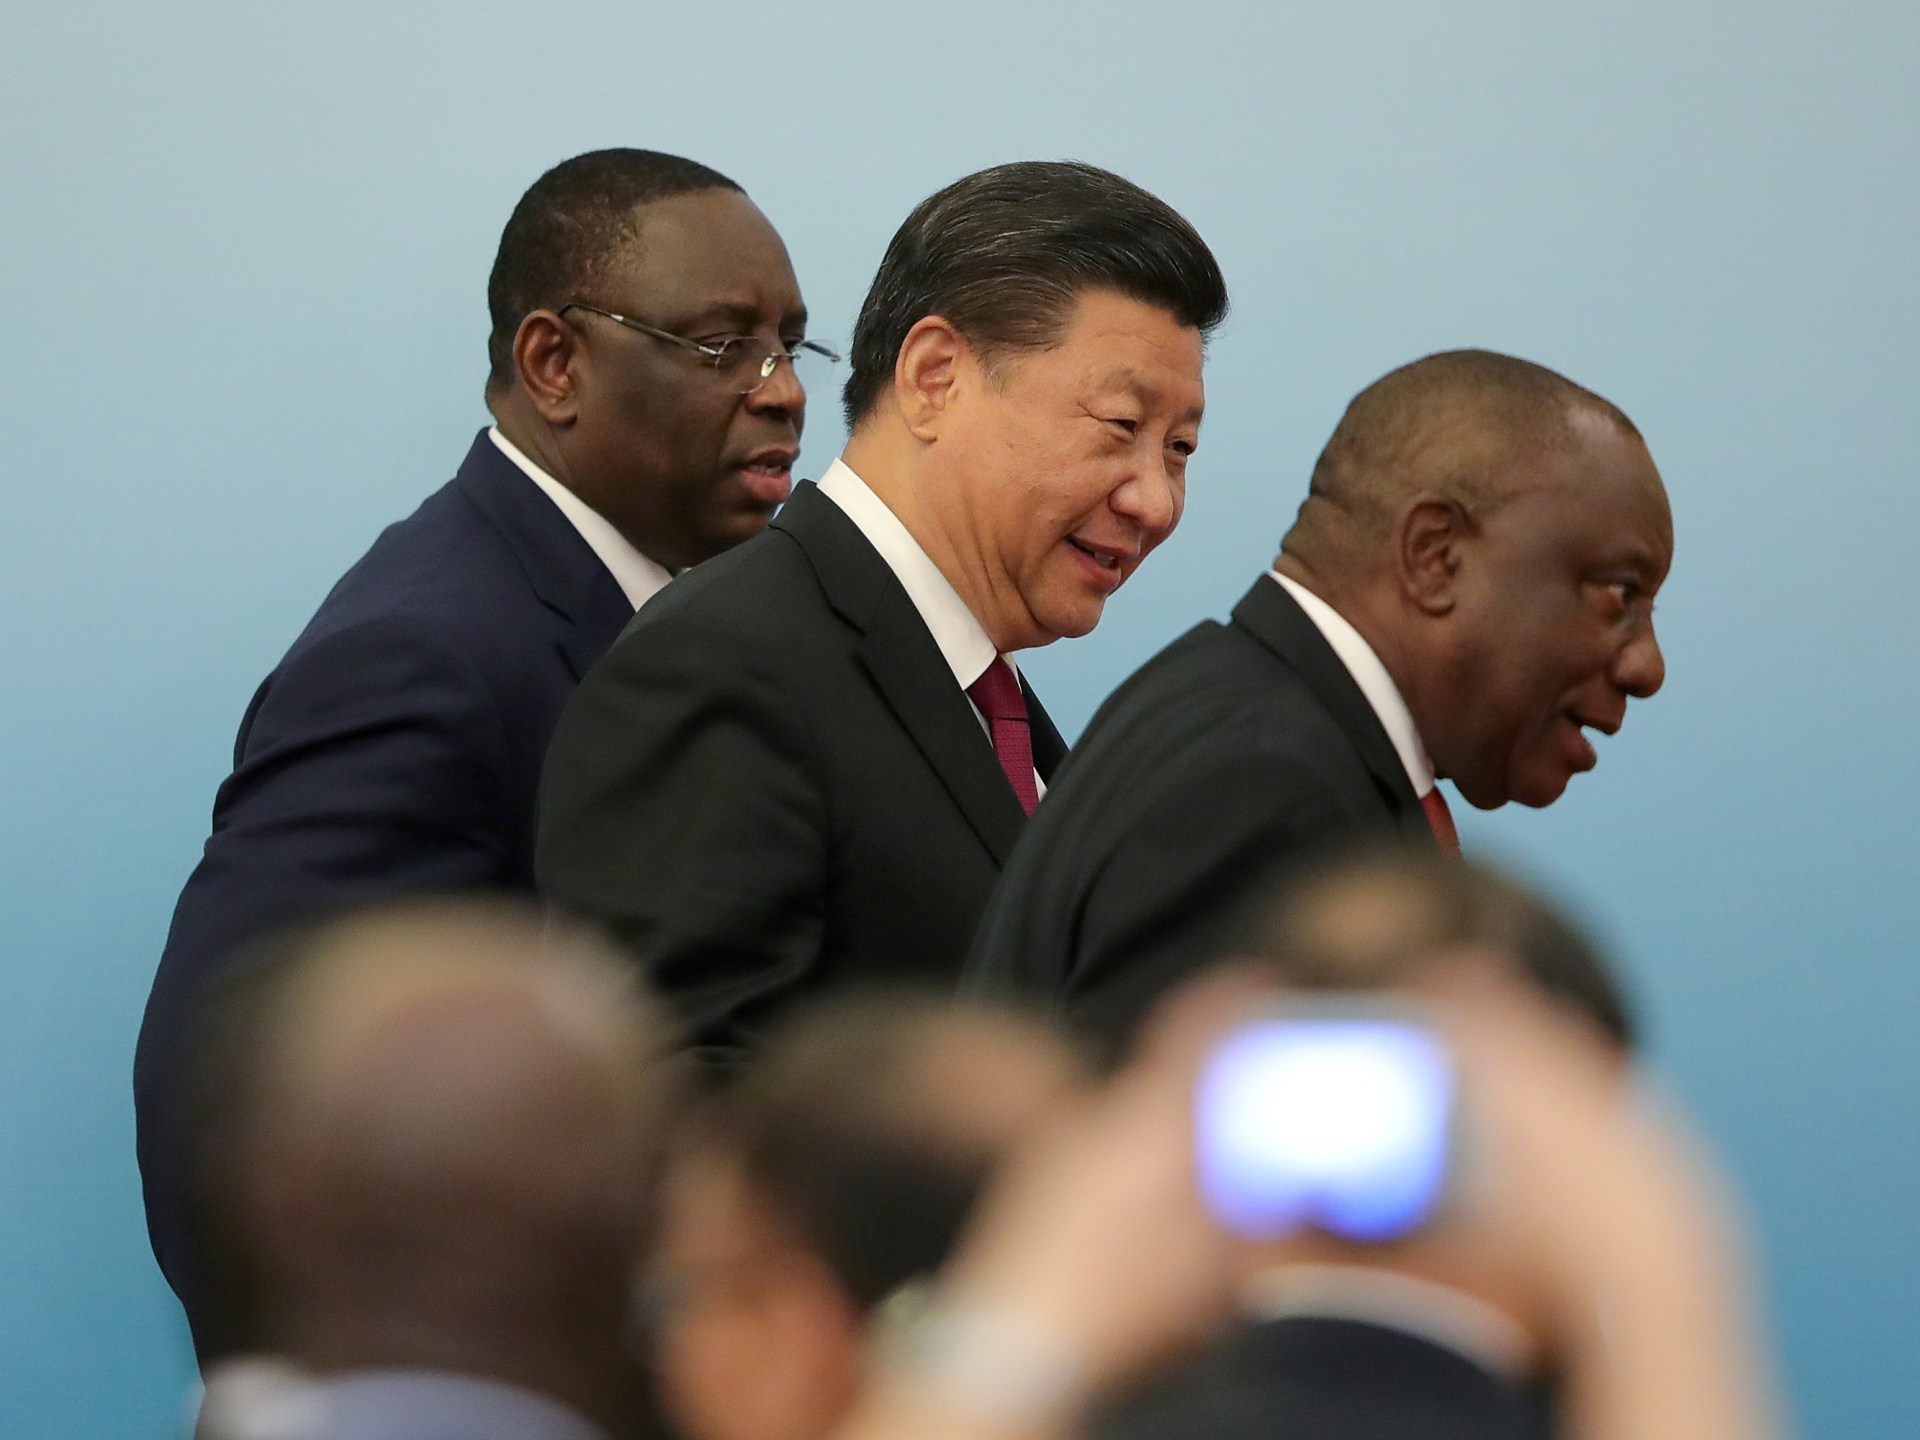 analysis-does-china-s-palace-diplomacy-benefit-africa-or-beijing